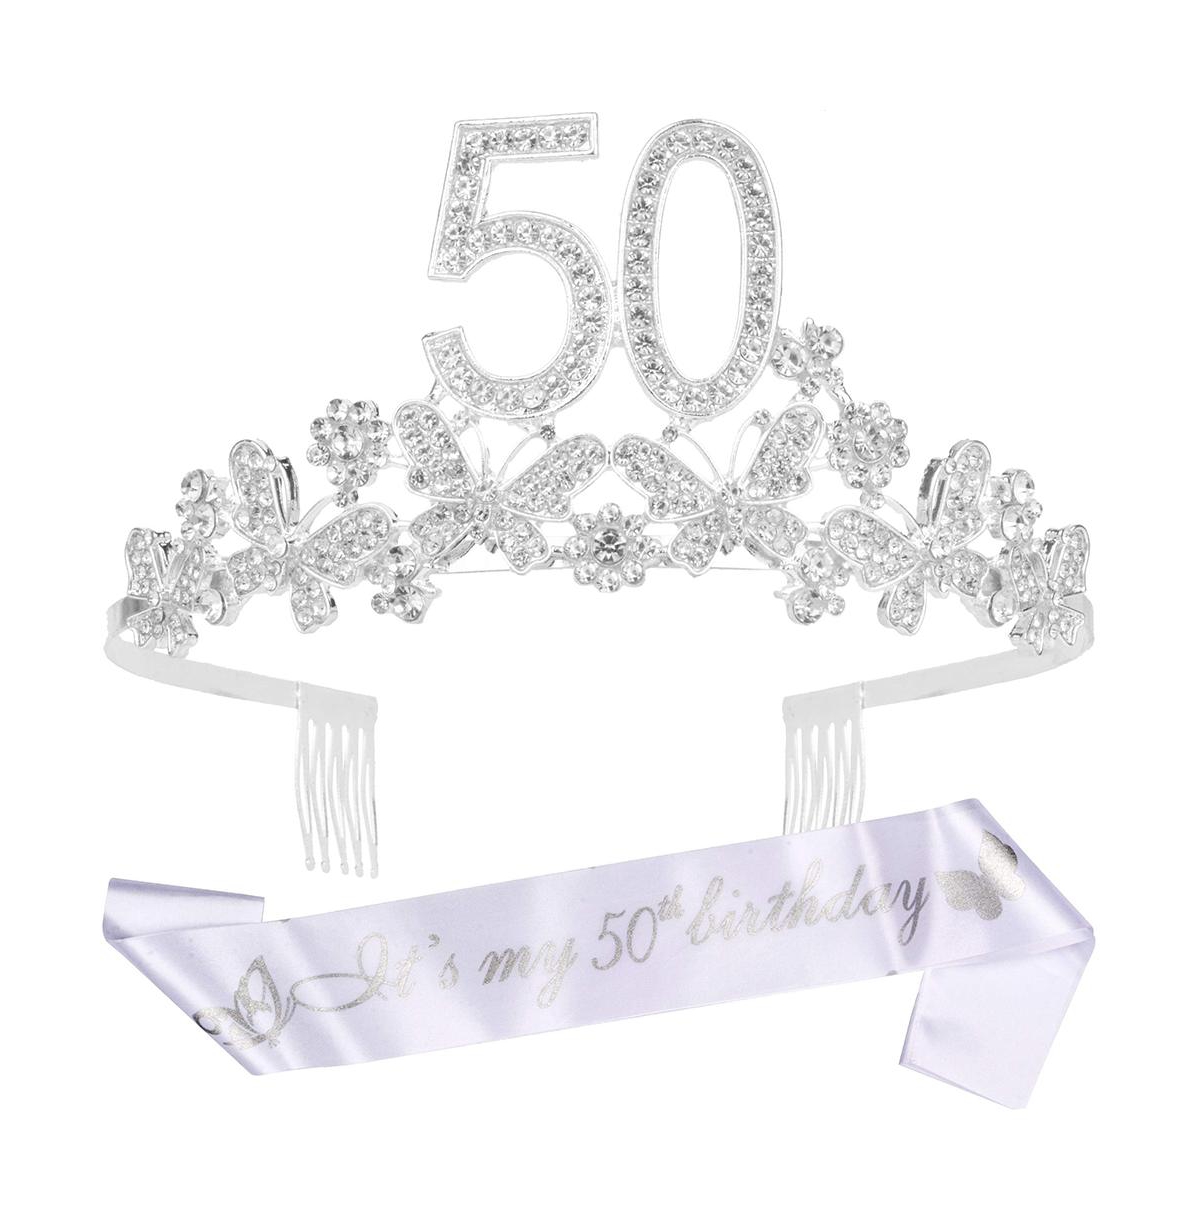 50th Birthday Sash and Tiara Set for Women - Perfect for Celebrating Her 50th Birthday Party - Silver